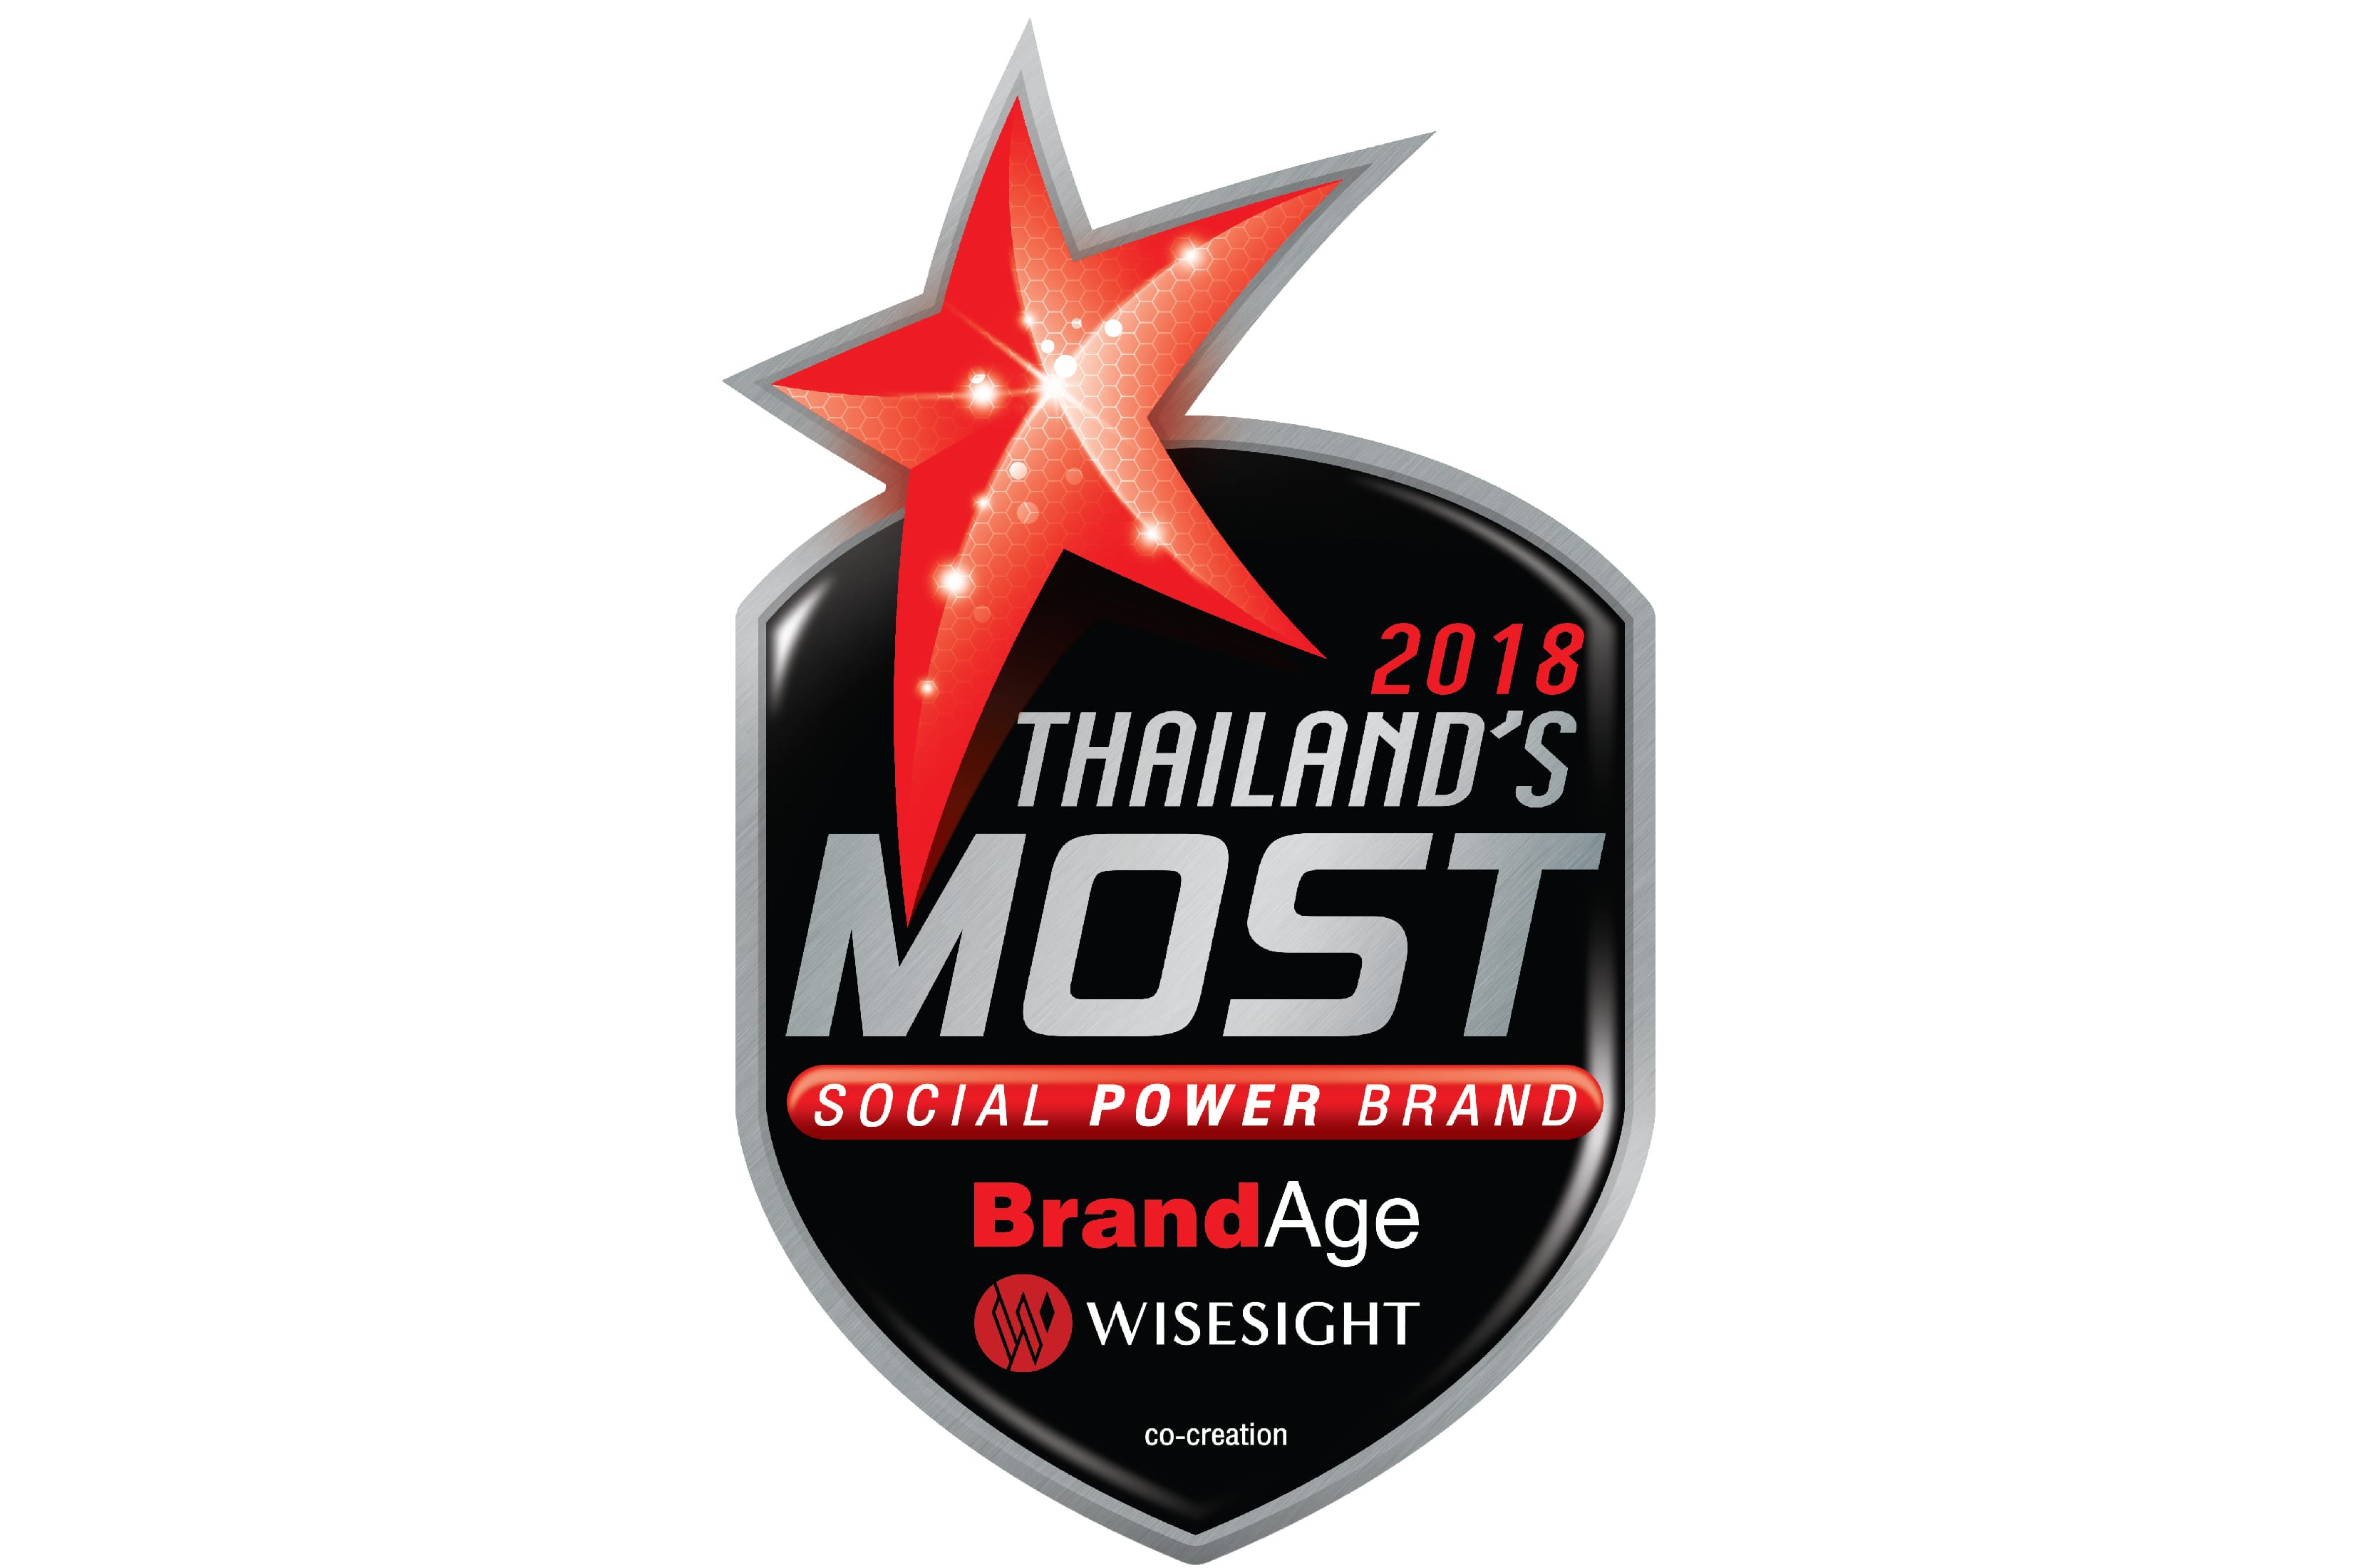 Thailand’s Most Social Power Brand 2018